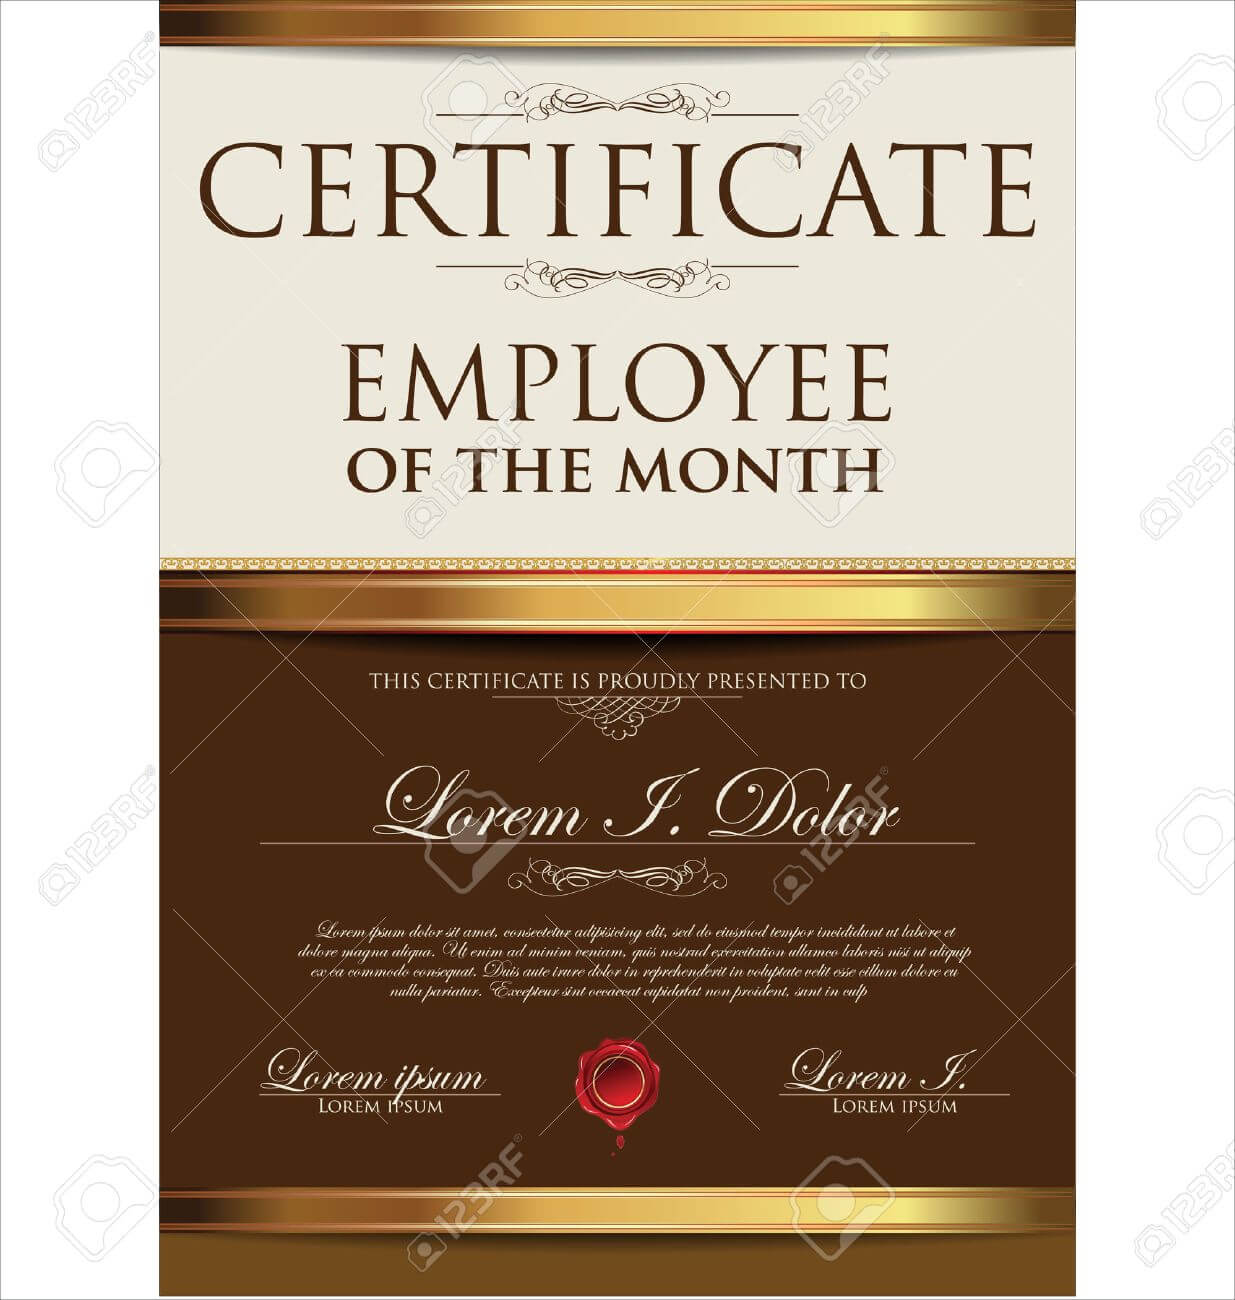 Certificate Template, Employee Of The Month Regarding Manager Of The Month Certificate Template